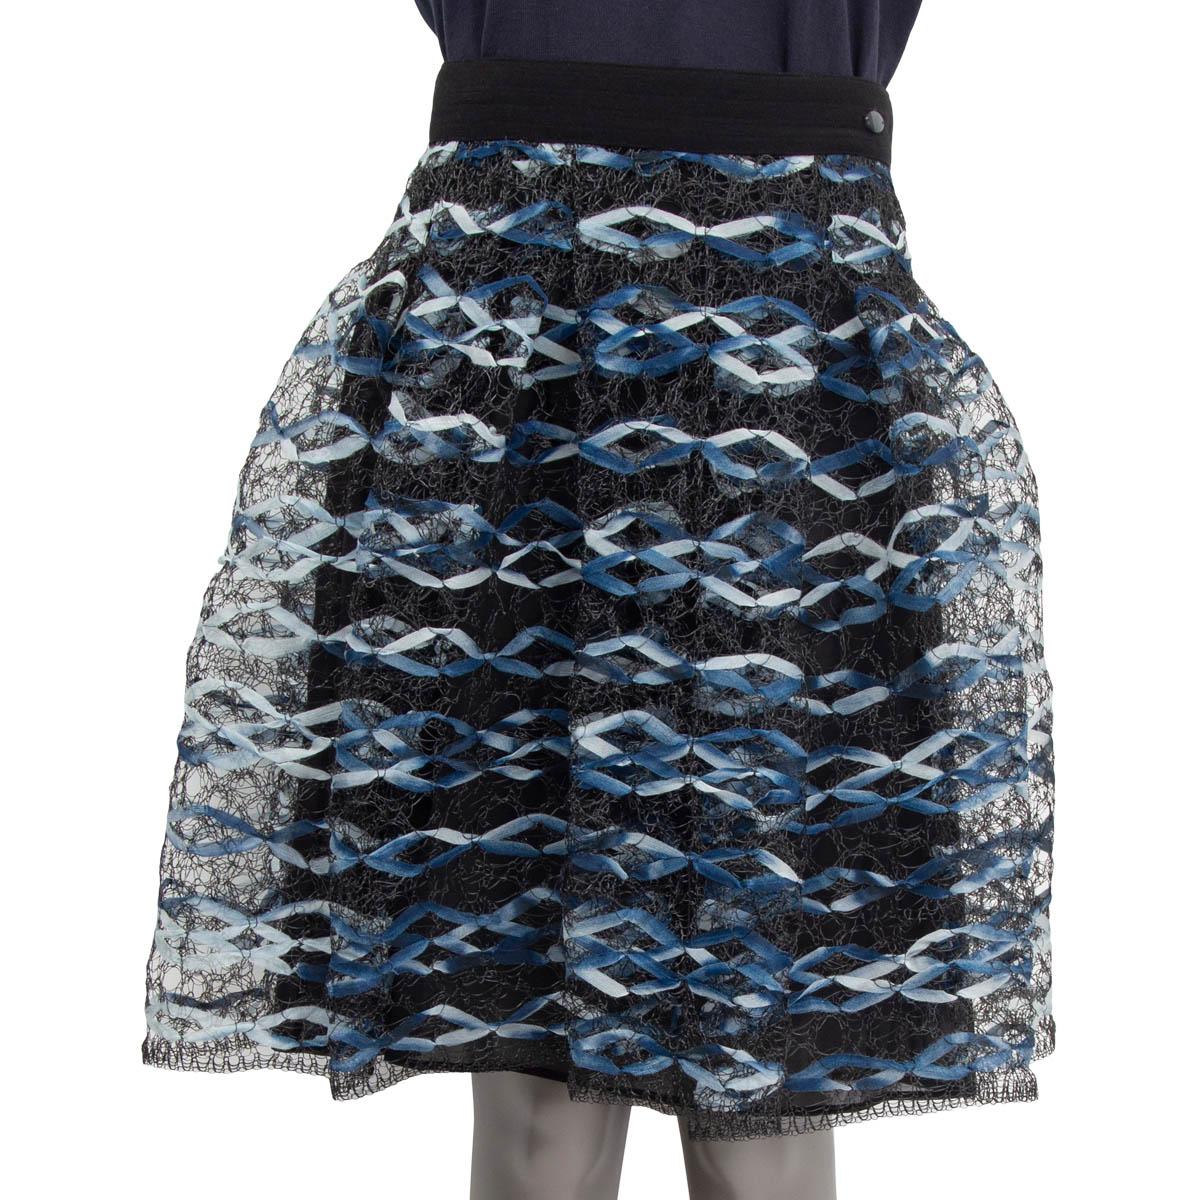 100% authentic Chanel Spring/Summer 2018 fishnet pleated skirt in navy, light blue and white polyester (37%), polyamide (36%) and cotton (27%). Features the 'CC' emblem at the waist. Opens with three push buttons at the back. Comes with a slit skirt